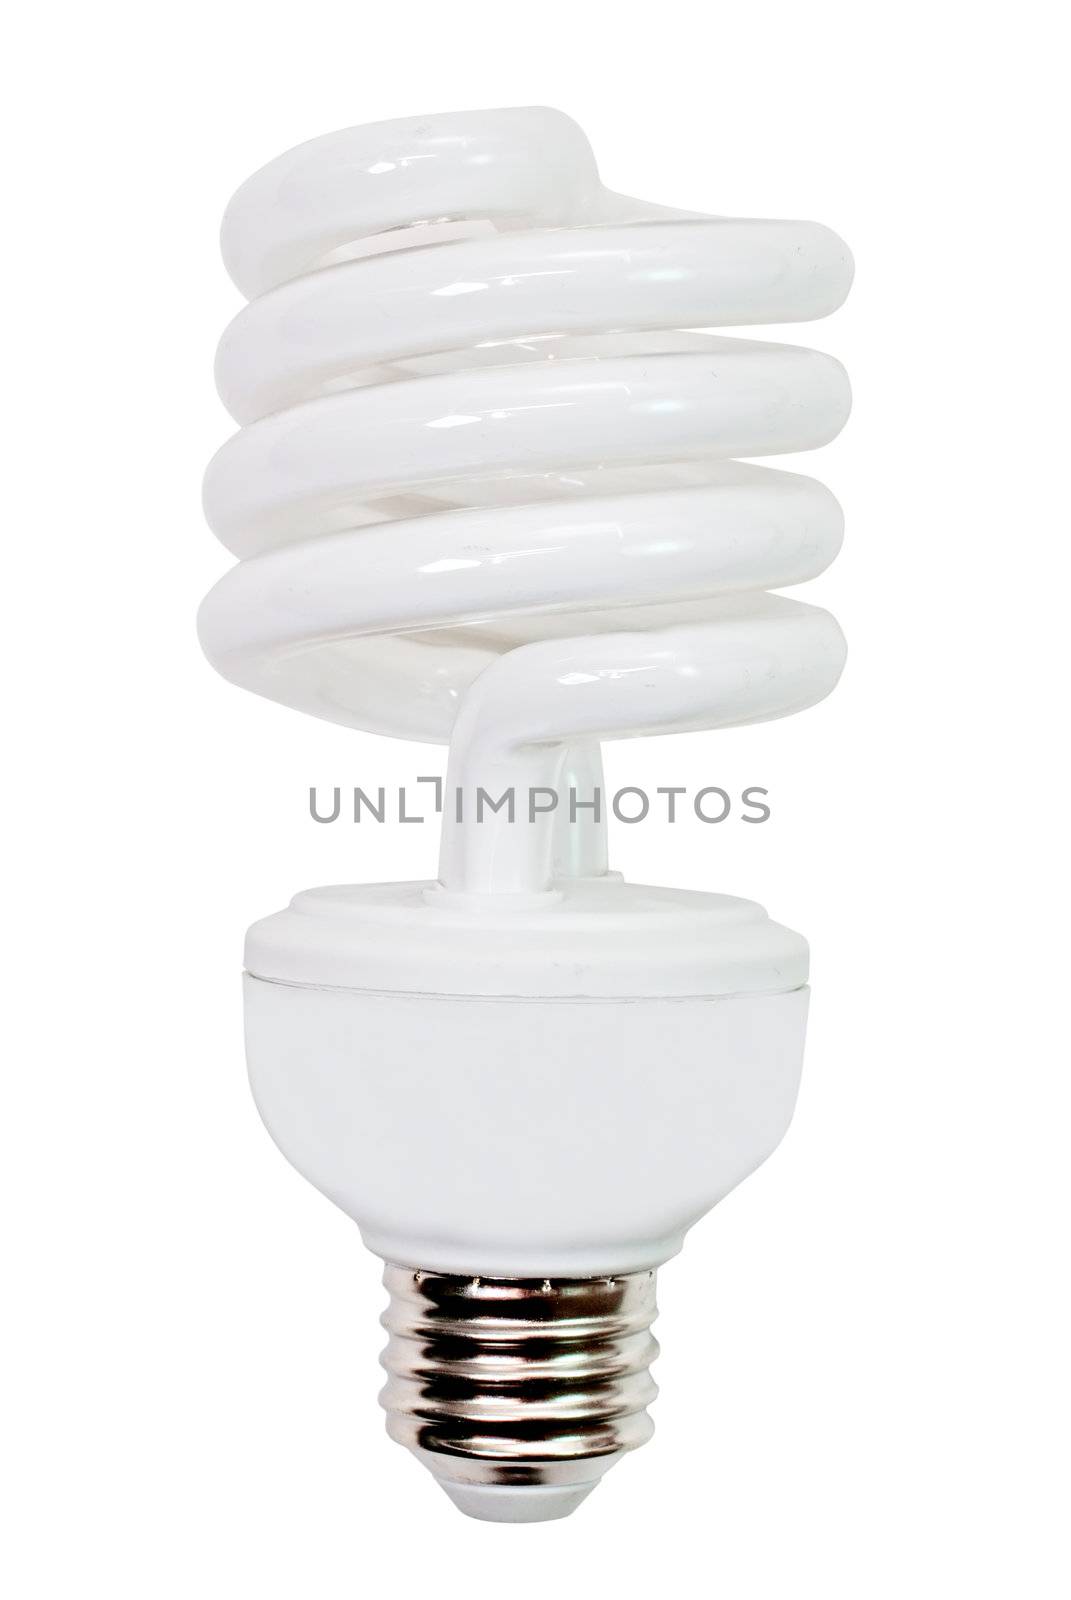 Compact fluorescent light bulb isolated on white background with clipping path.